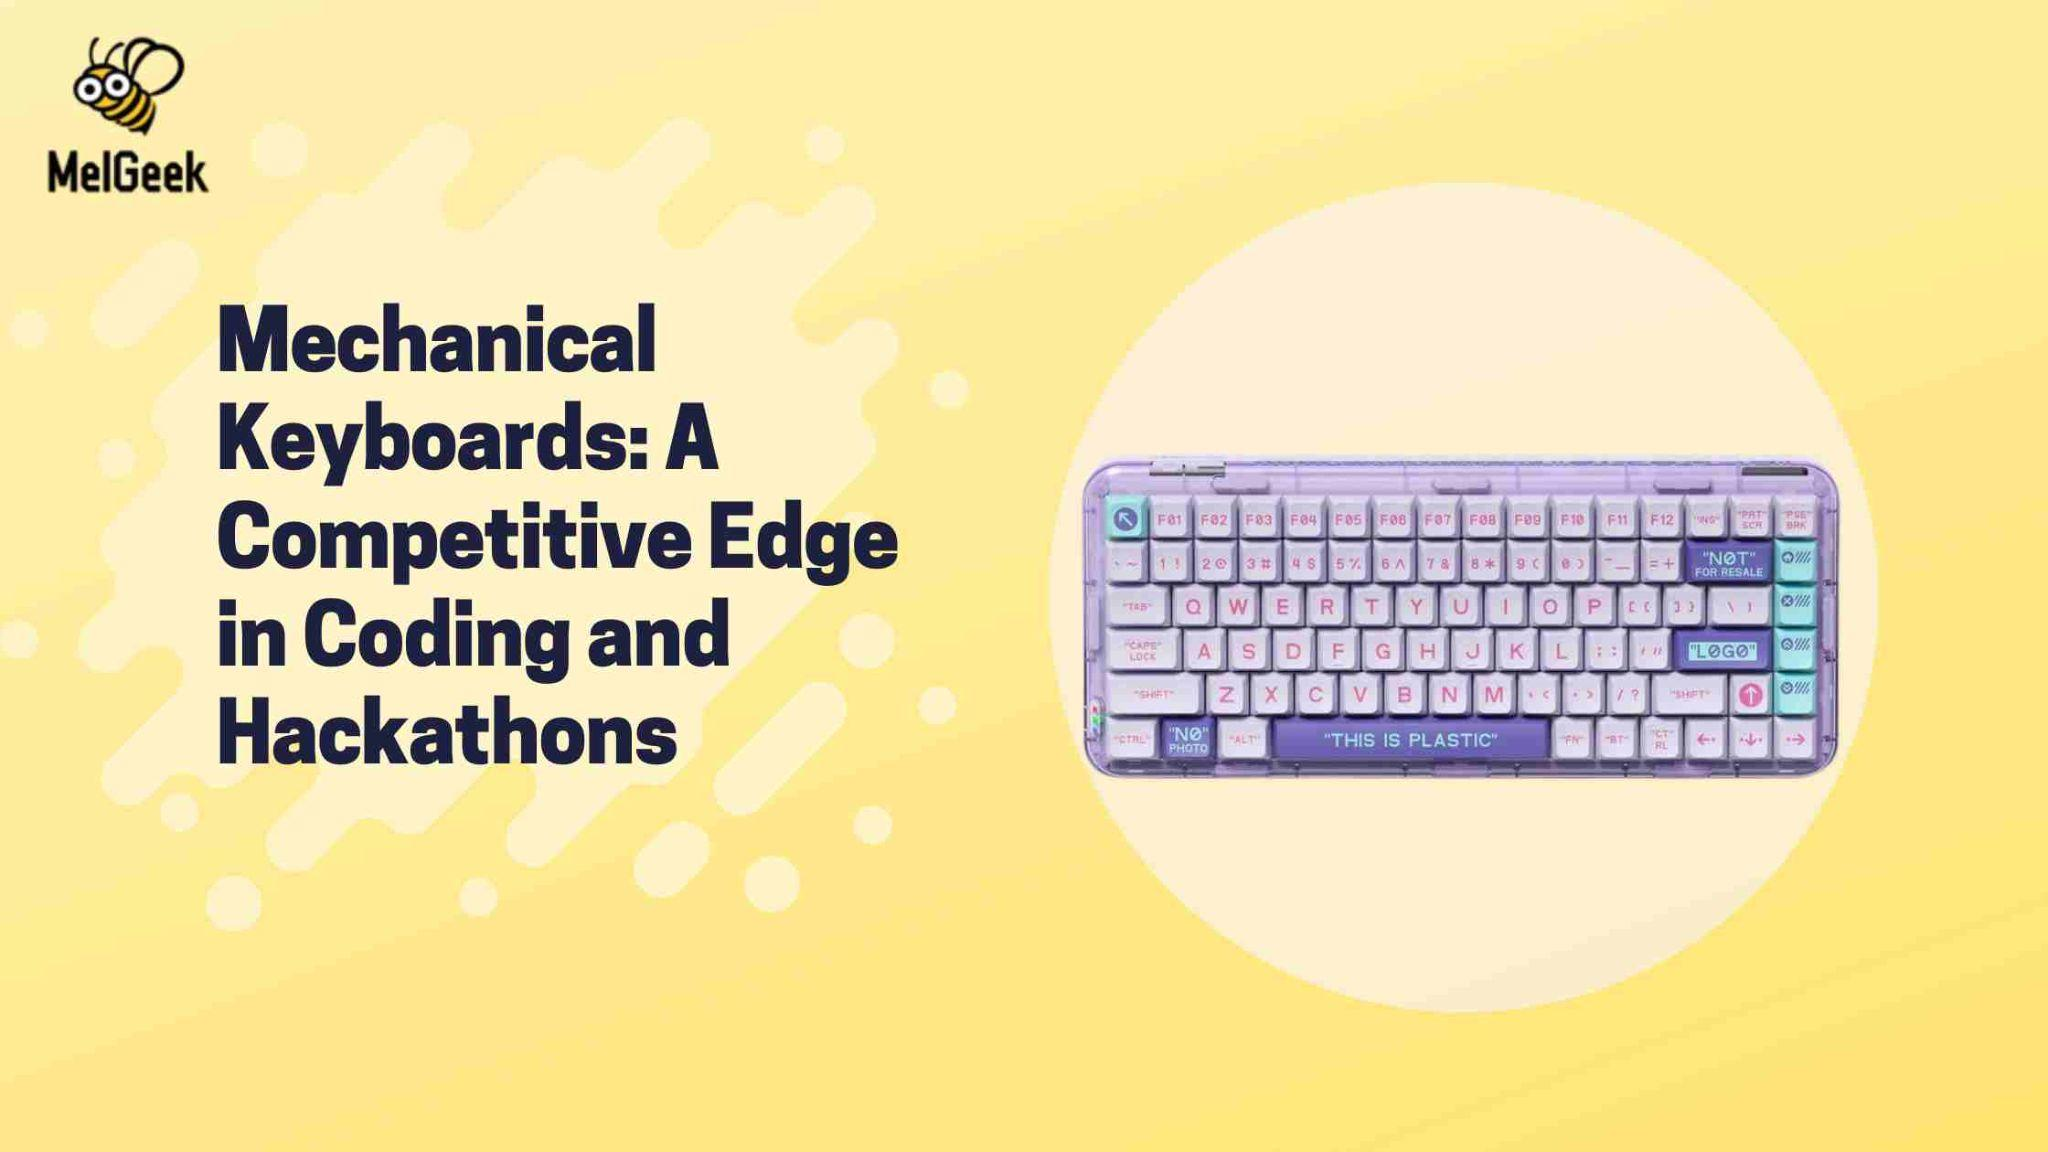 Mechanical Keyboards: A Competitive Edge in Coding and Hackathons